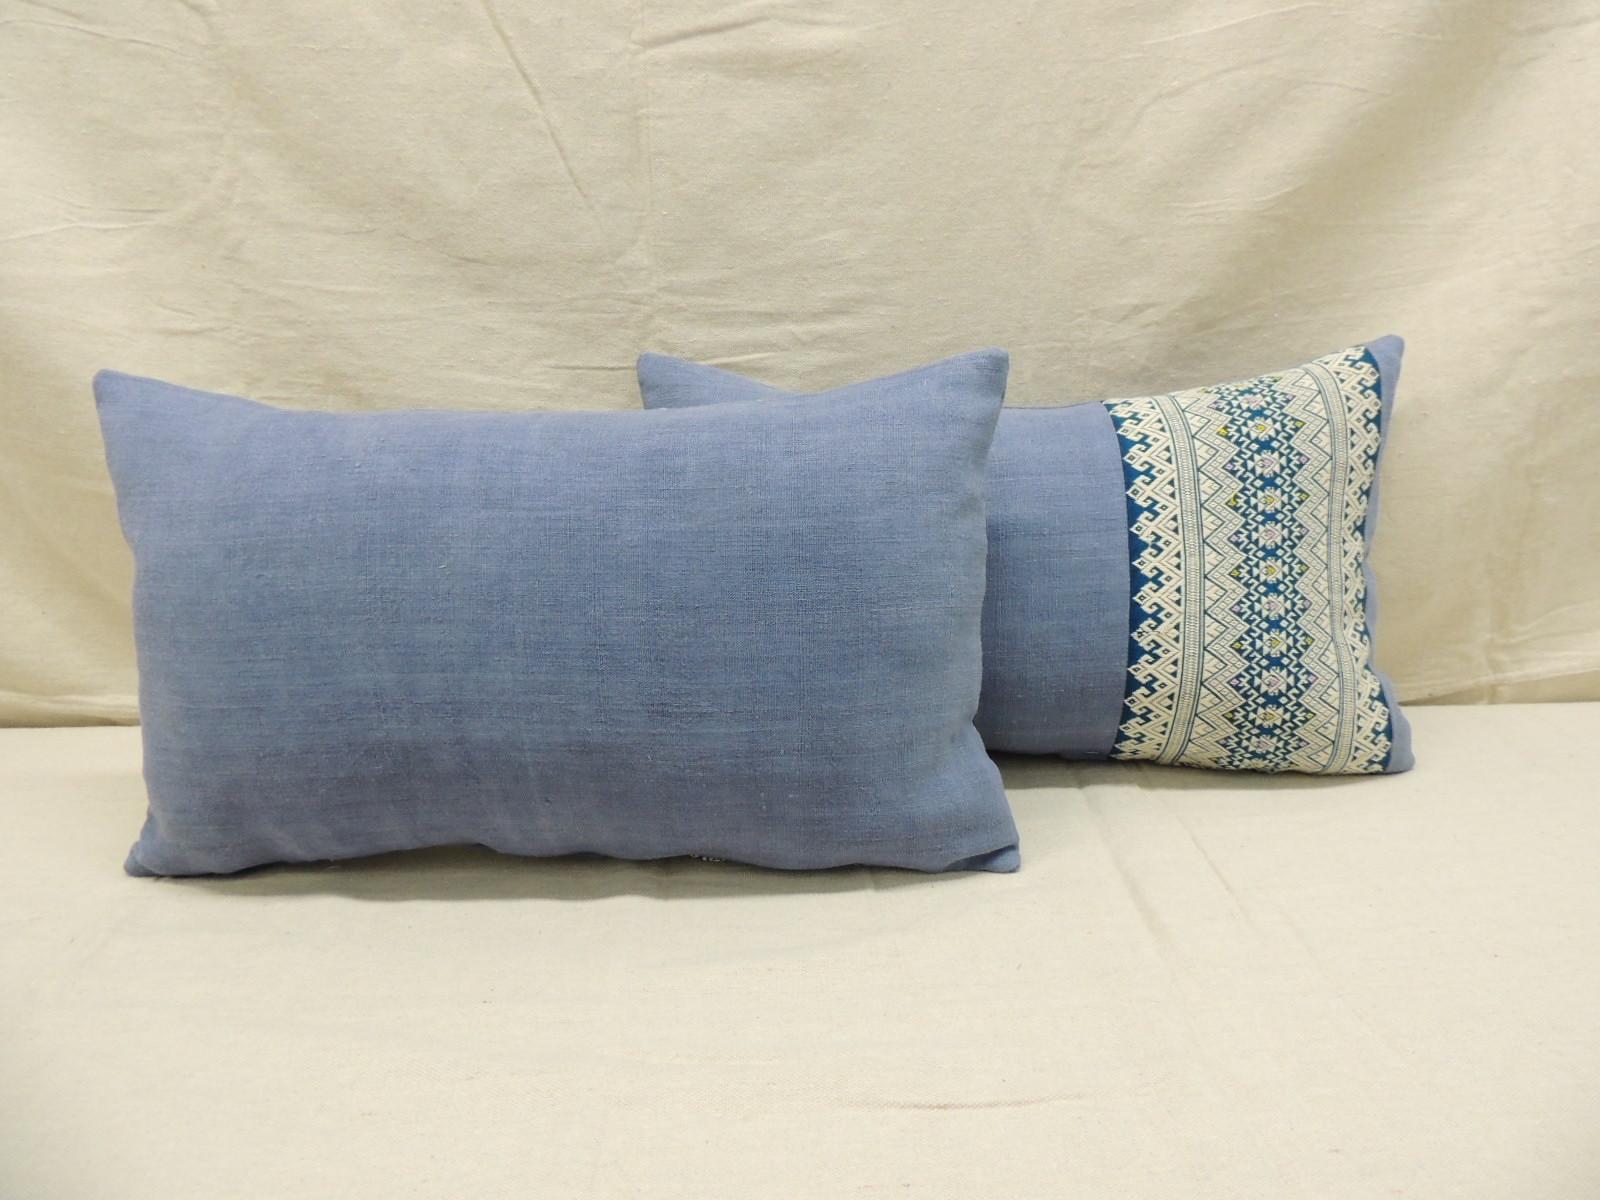 Late 20th Century Pair of Vintage Blue and White Asian Decorative Lumbar Pillows